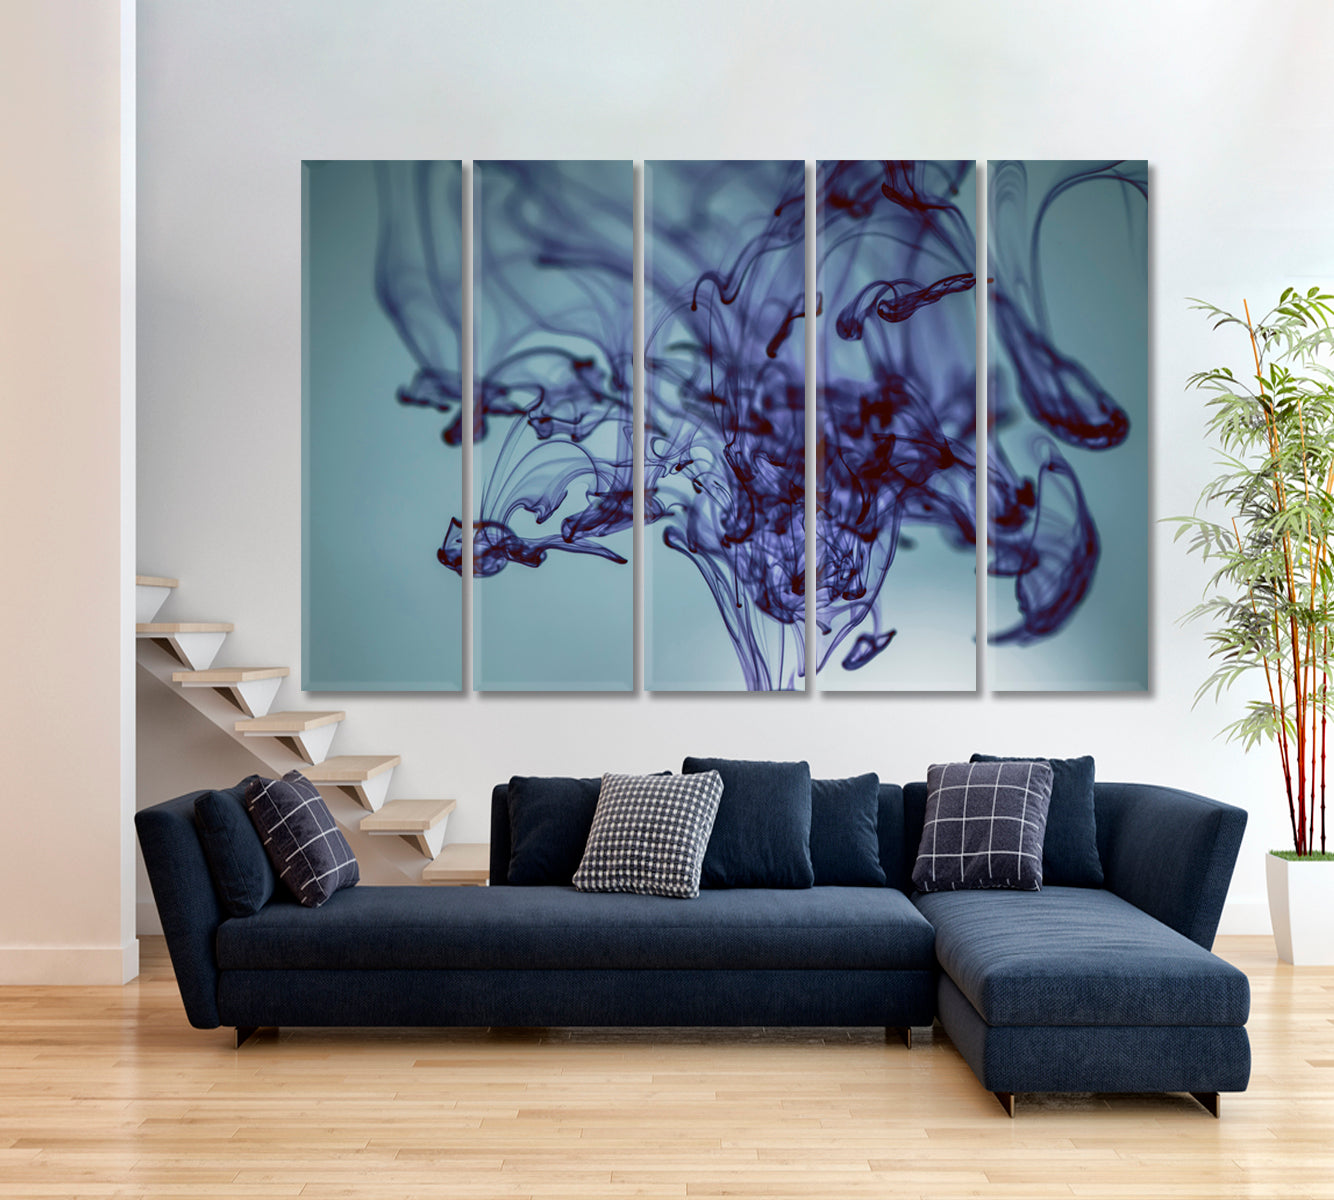 INK IN WATER Abstract Painting Fluid Art, Oriental Marbling Canvas Print Artesty 5 panels 36" x 24" 